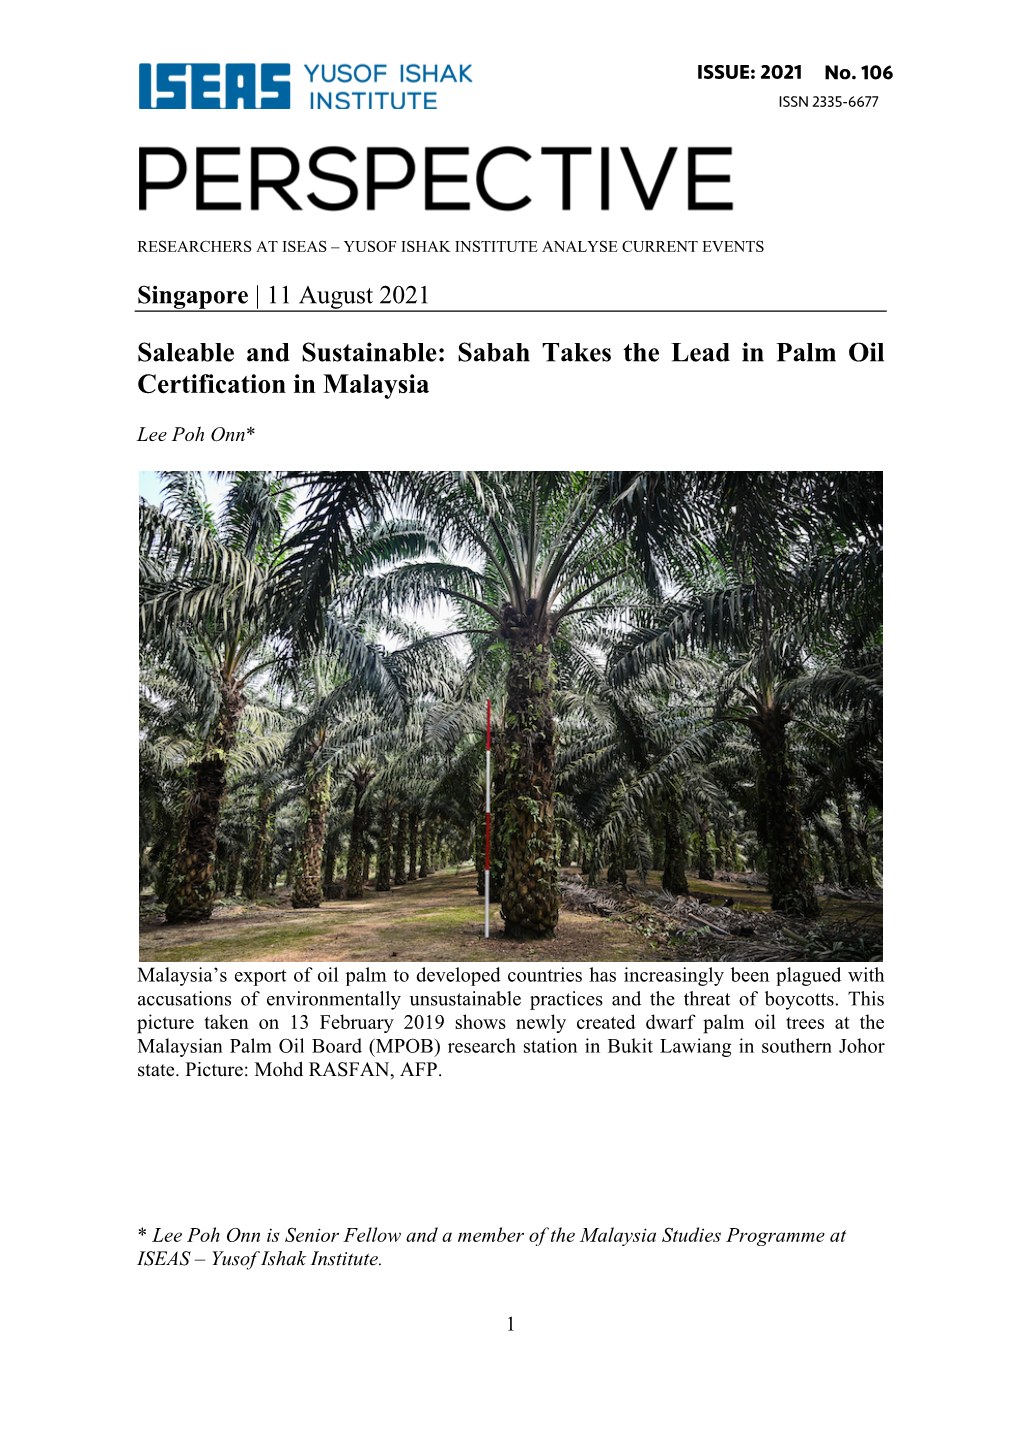 Saleable and Sustainable: Sabah Takes the Lead in Palm Oil Certification in Malaysia